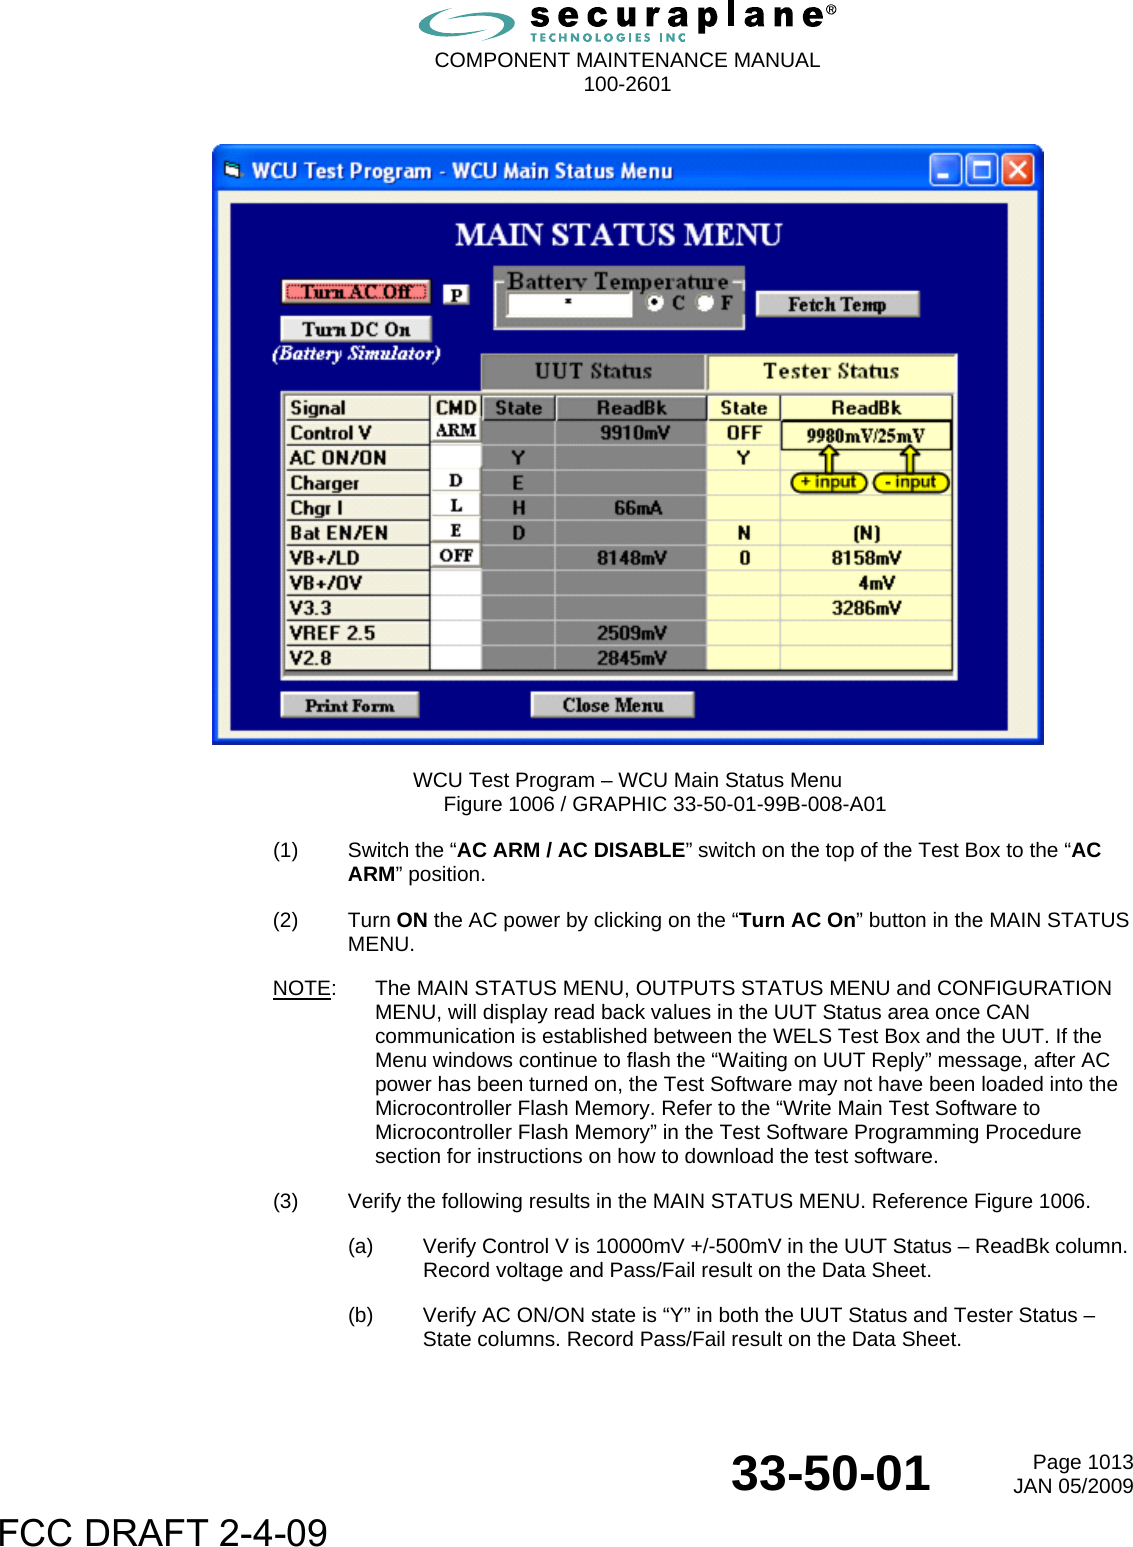  COMPONENT MAINTENANCE MANUAL  100-2601  33-50-01  Page 1013JAN 05/2009    WCU Test Program – WCU Main Status Menu Figure 1006 / GRAPHIC 33-50-01-99B-008-A01 (1)  Switch the “AC ARM / AC DISABLE” switch on the top of the Test Box to the “AC ARM” position. (2) Turn ON the AC power by clicking on the “Turn AC On” button in the MAIN STATUS MENU. NOTE:  The MAIN STATUS MENU, OUTPUTS STATUS MENU and CONFIGURATION MENU, will display read back values in the UUT Status area once CAN communication is established between the WELS Test Box and the UUT. If the Menu windows continue to flash the “Waiting on UUT Reply” message, after AC power has been turned on, the Test Software may not have been loaded into the Microcontroller Flash Memory. Refer to the “Write Main Test Software to Microcontroller Flash Memory” in the Test Software Programming Procedure section for instructions on how to download the test software. (3)  Verify the following results in the MAIN STATUS MENU. Reference Figure 1006. (a)  Verify Control V is 10000mV +/-500mV in the UUT Status – ReadBk column. Record voltage and Pass/Fail result on the Data Sheet. (b)  Verify AC ON/ON state is “Y” in both the UUT Status and Tester Status – State columns. Record Pass/Fail result on the Data Sheet. FCC DRAFT 2-4-09